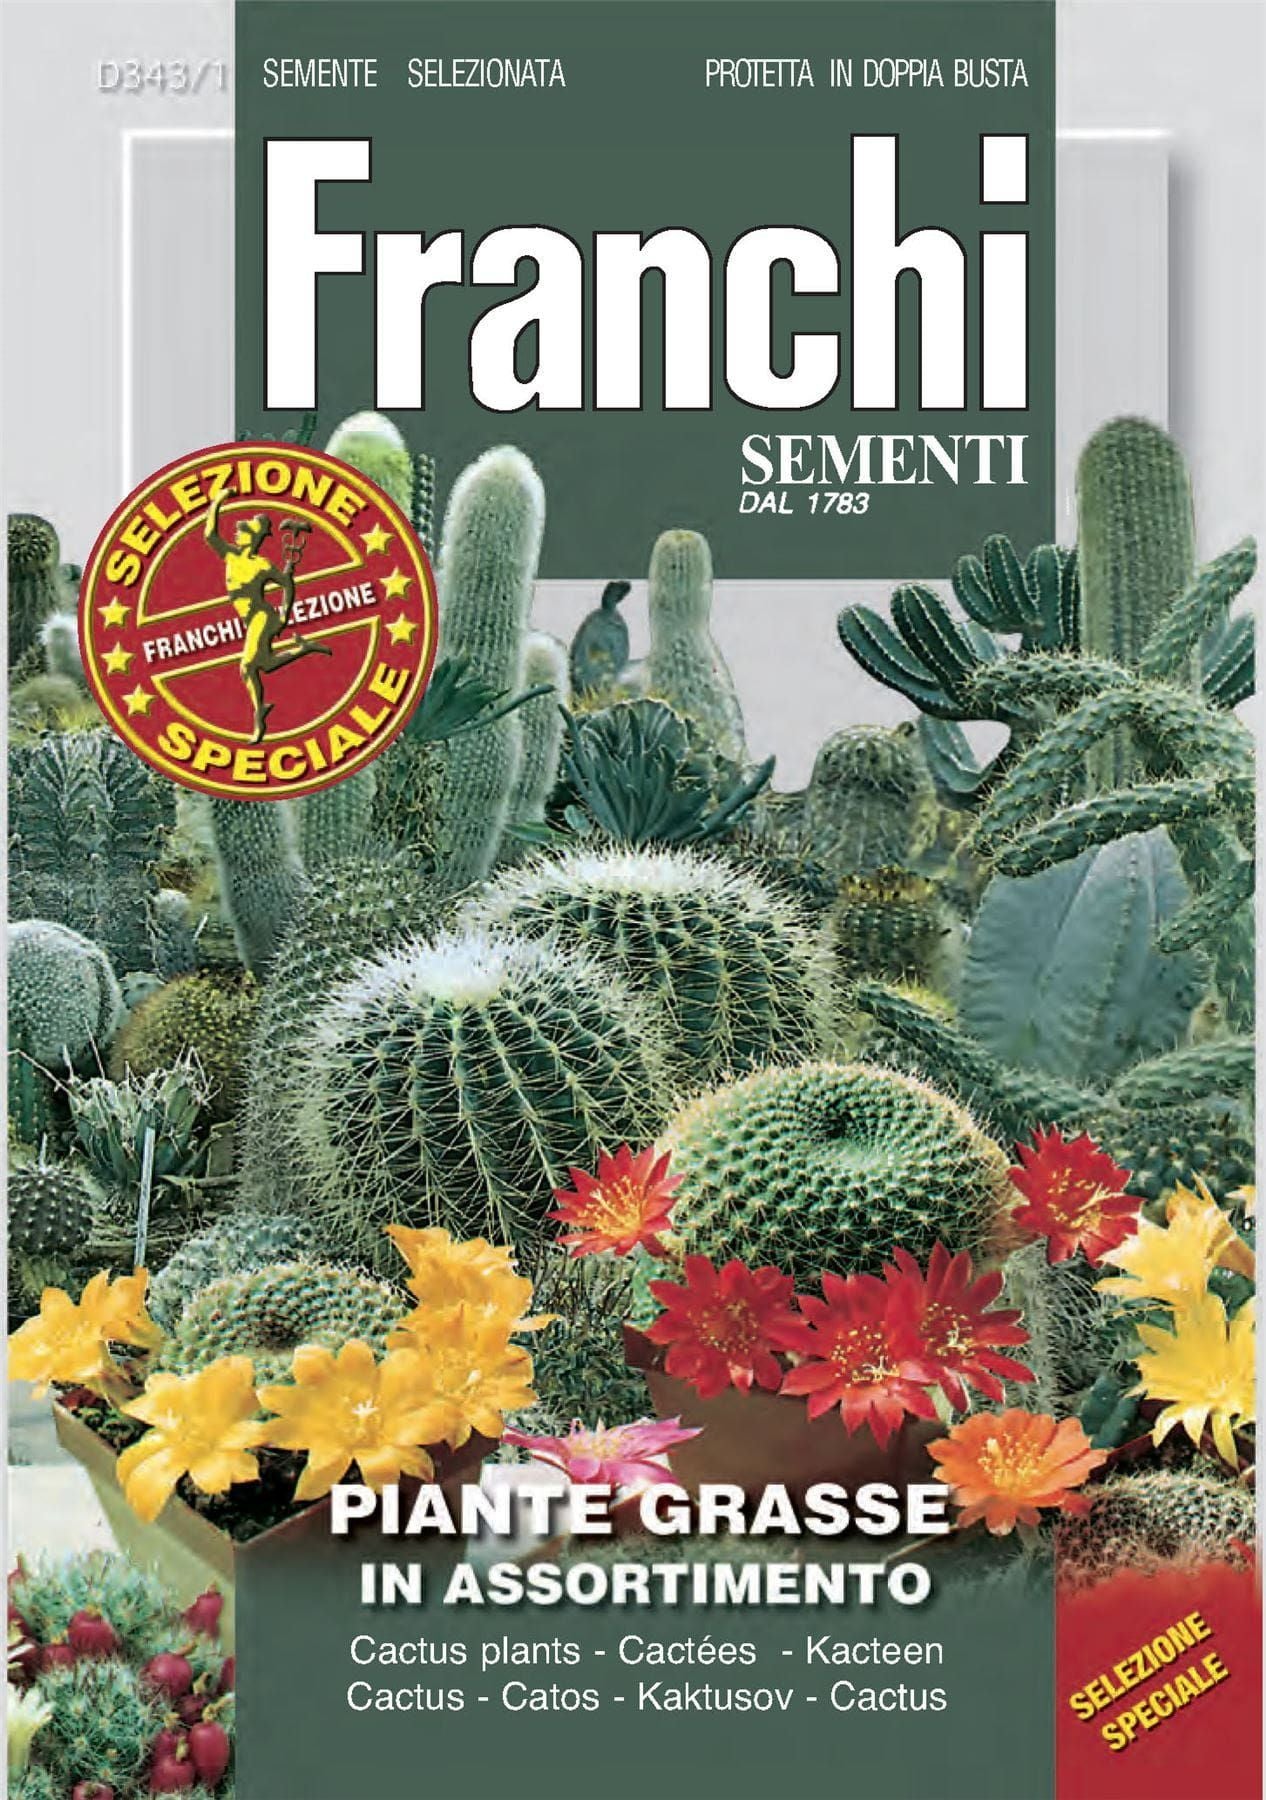 Franchi Seeds of Italy - Flower - FDBF_S 343-1 - Cactus Mixed - Seeds